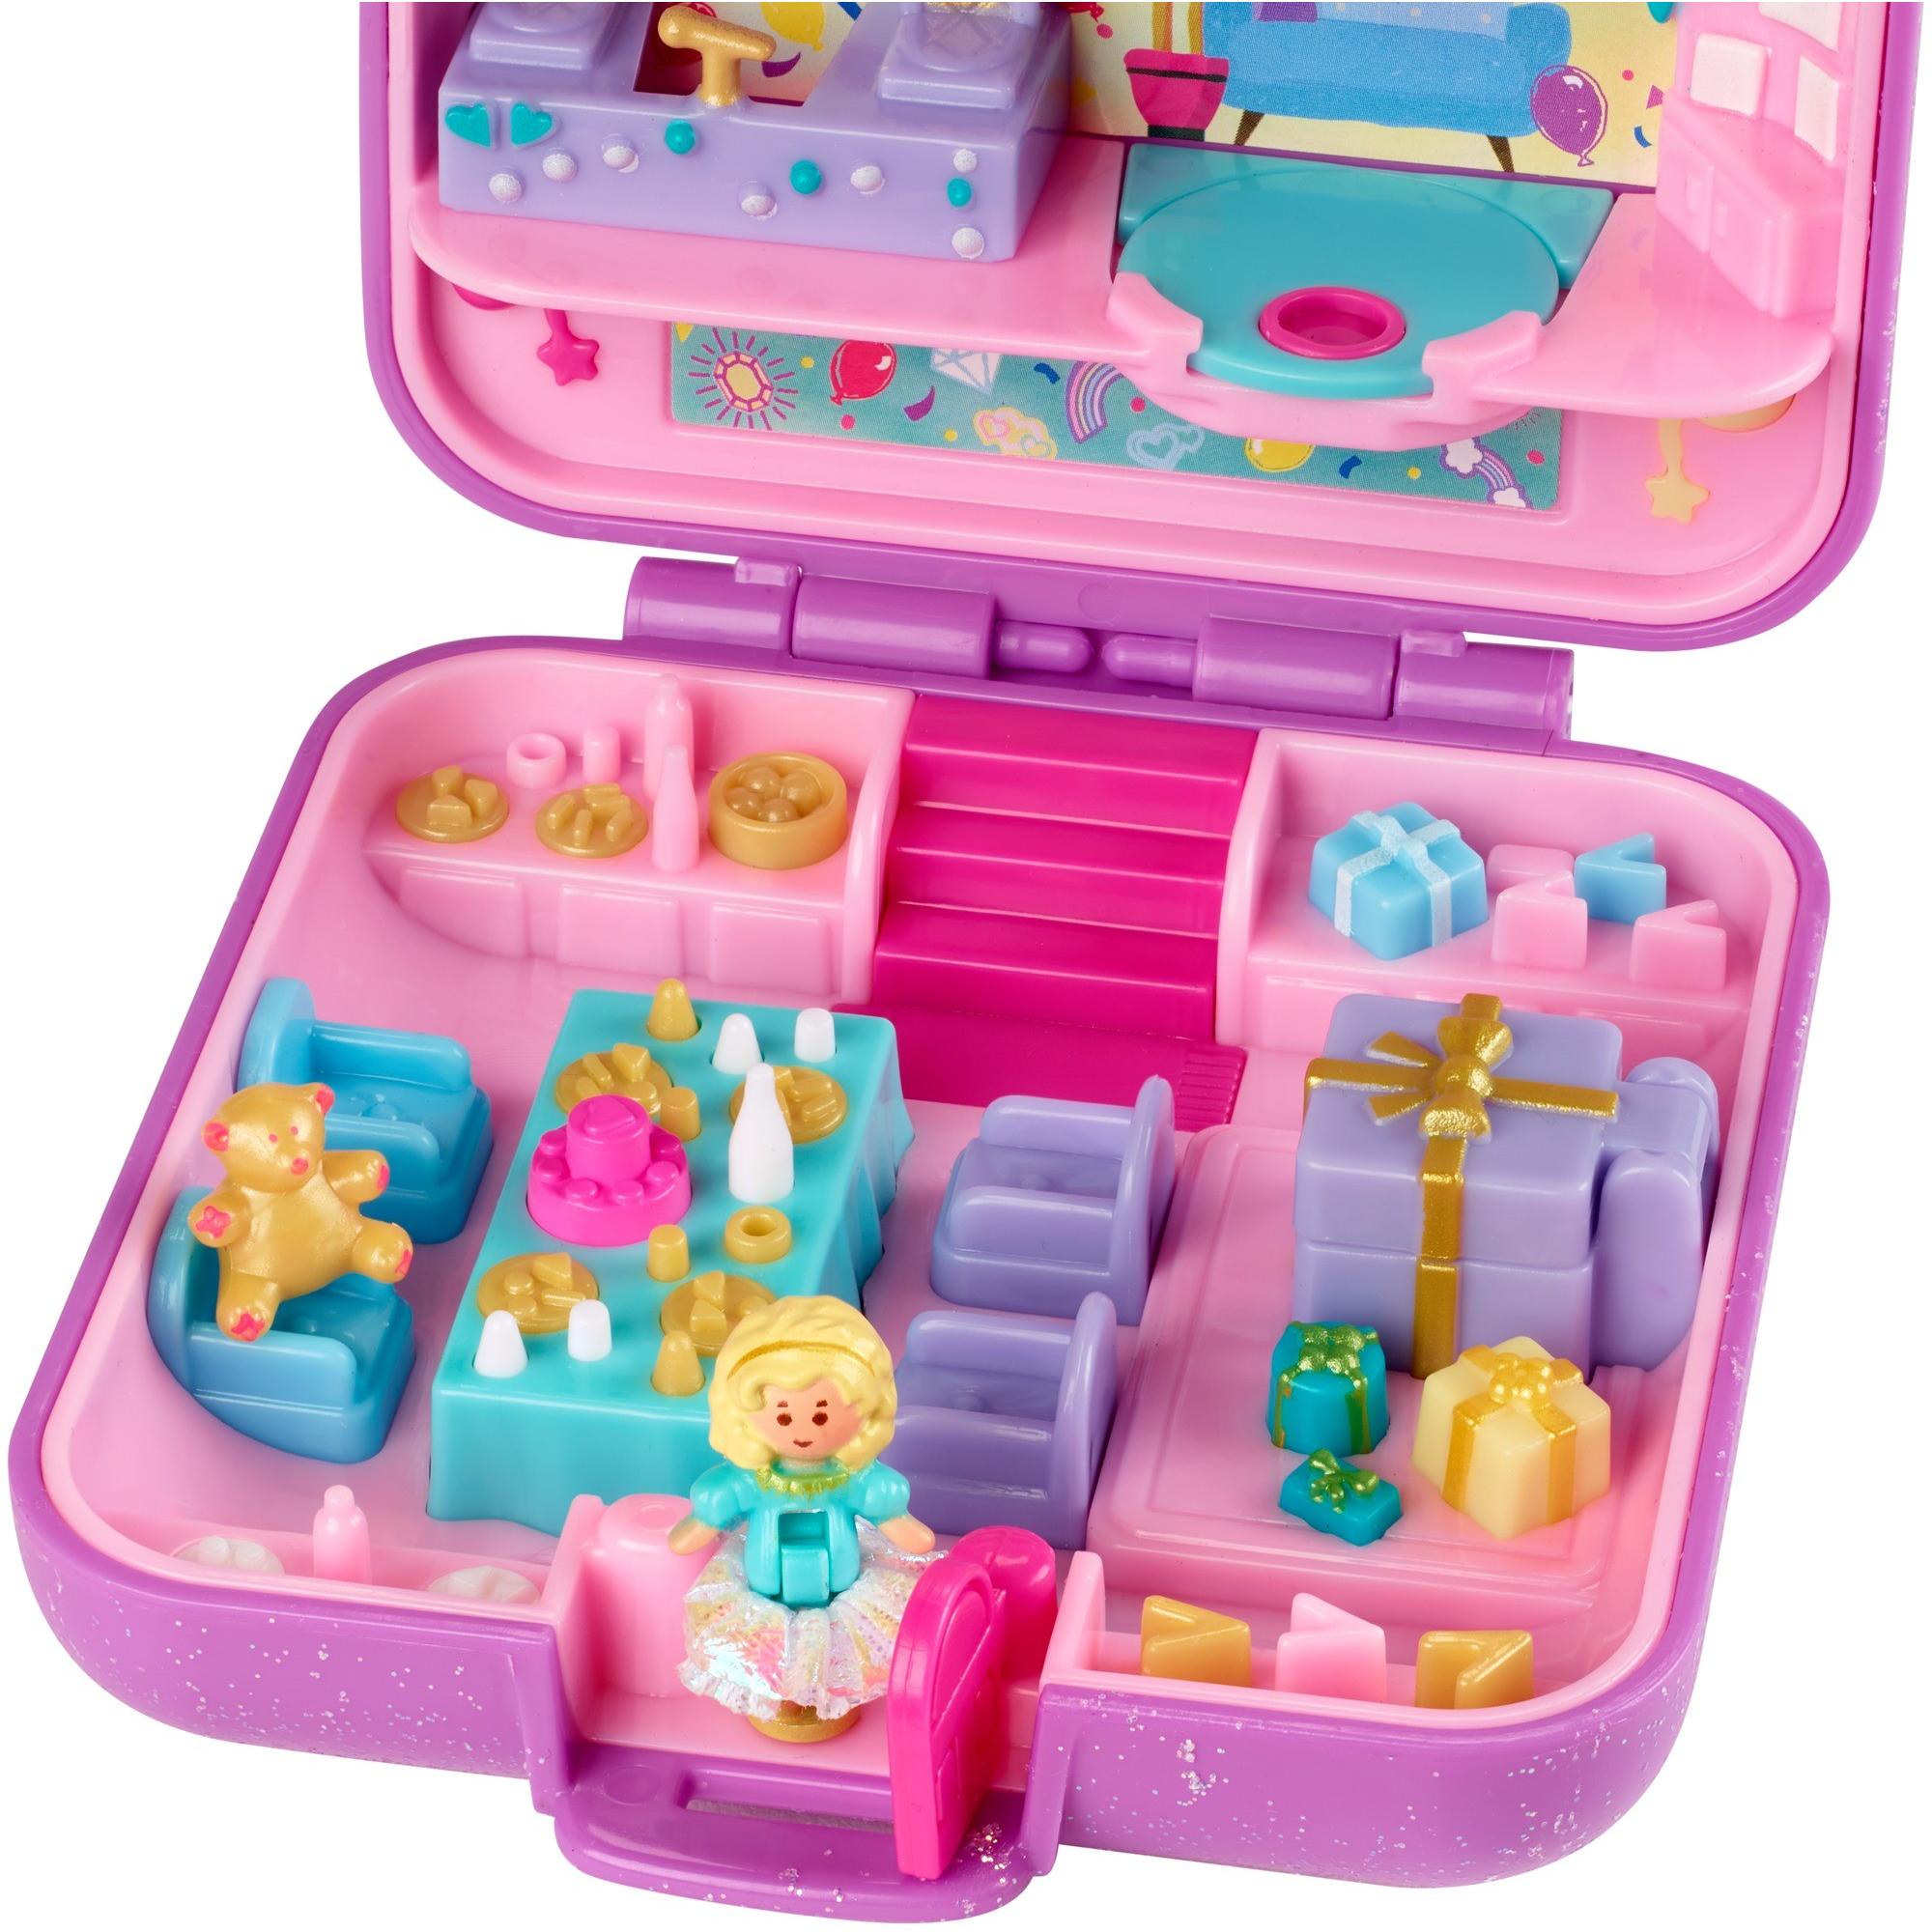 Polly Pocket Partytime Surprise Keepsake 30th Anniversary Compact - image 4 of 6